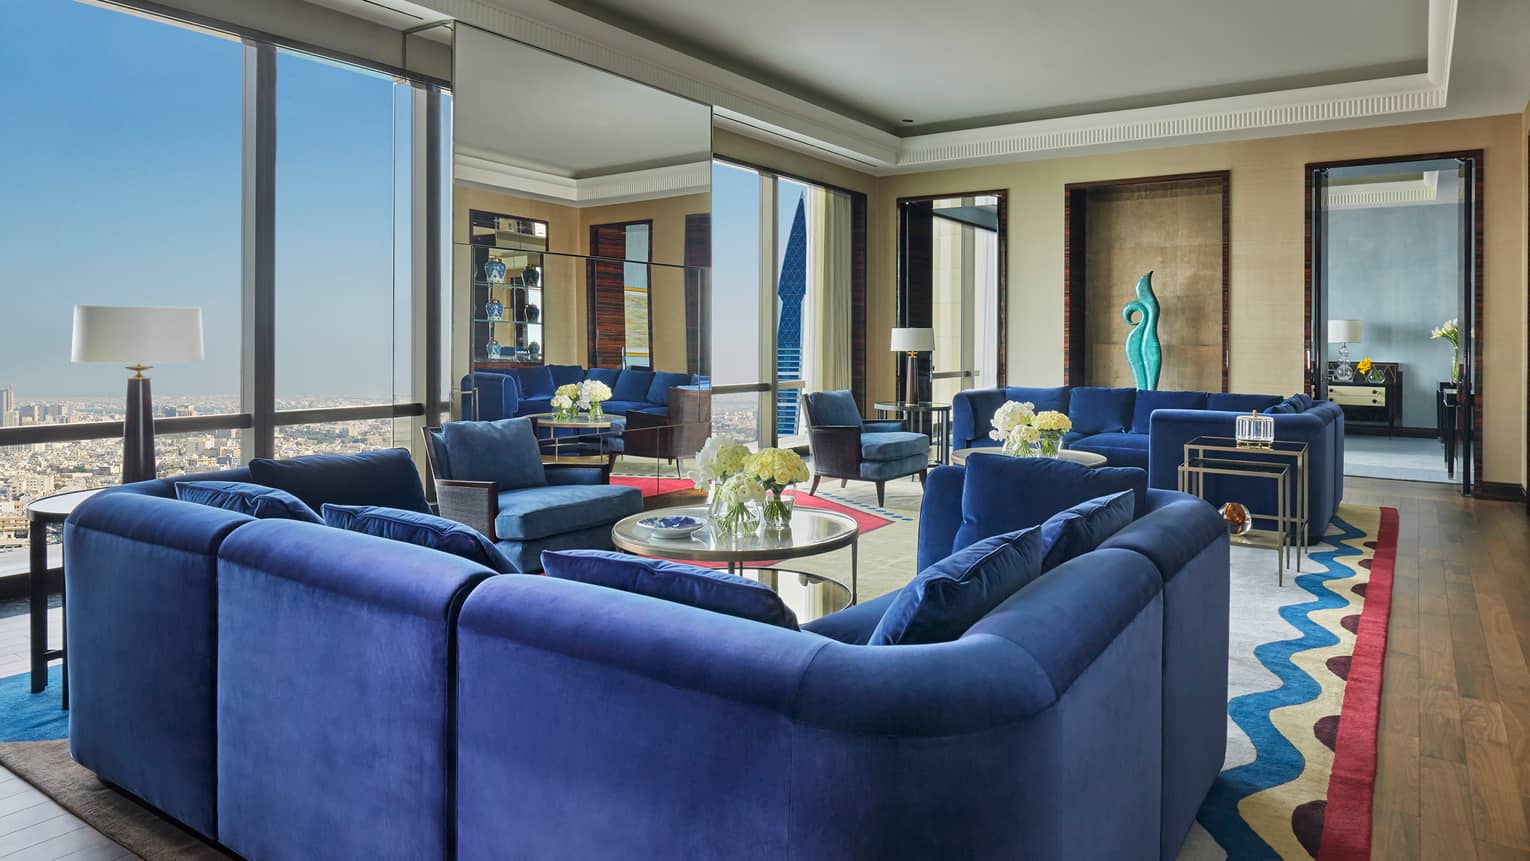 Royal Suite large u-shaped blue plush sofa, multiple seating areas, window with Bahrain city views